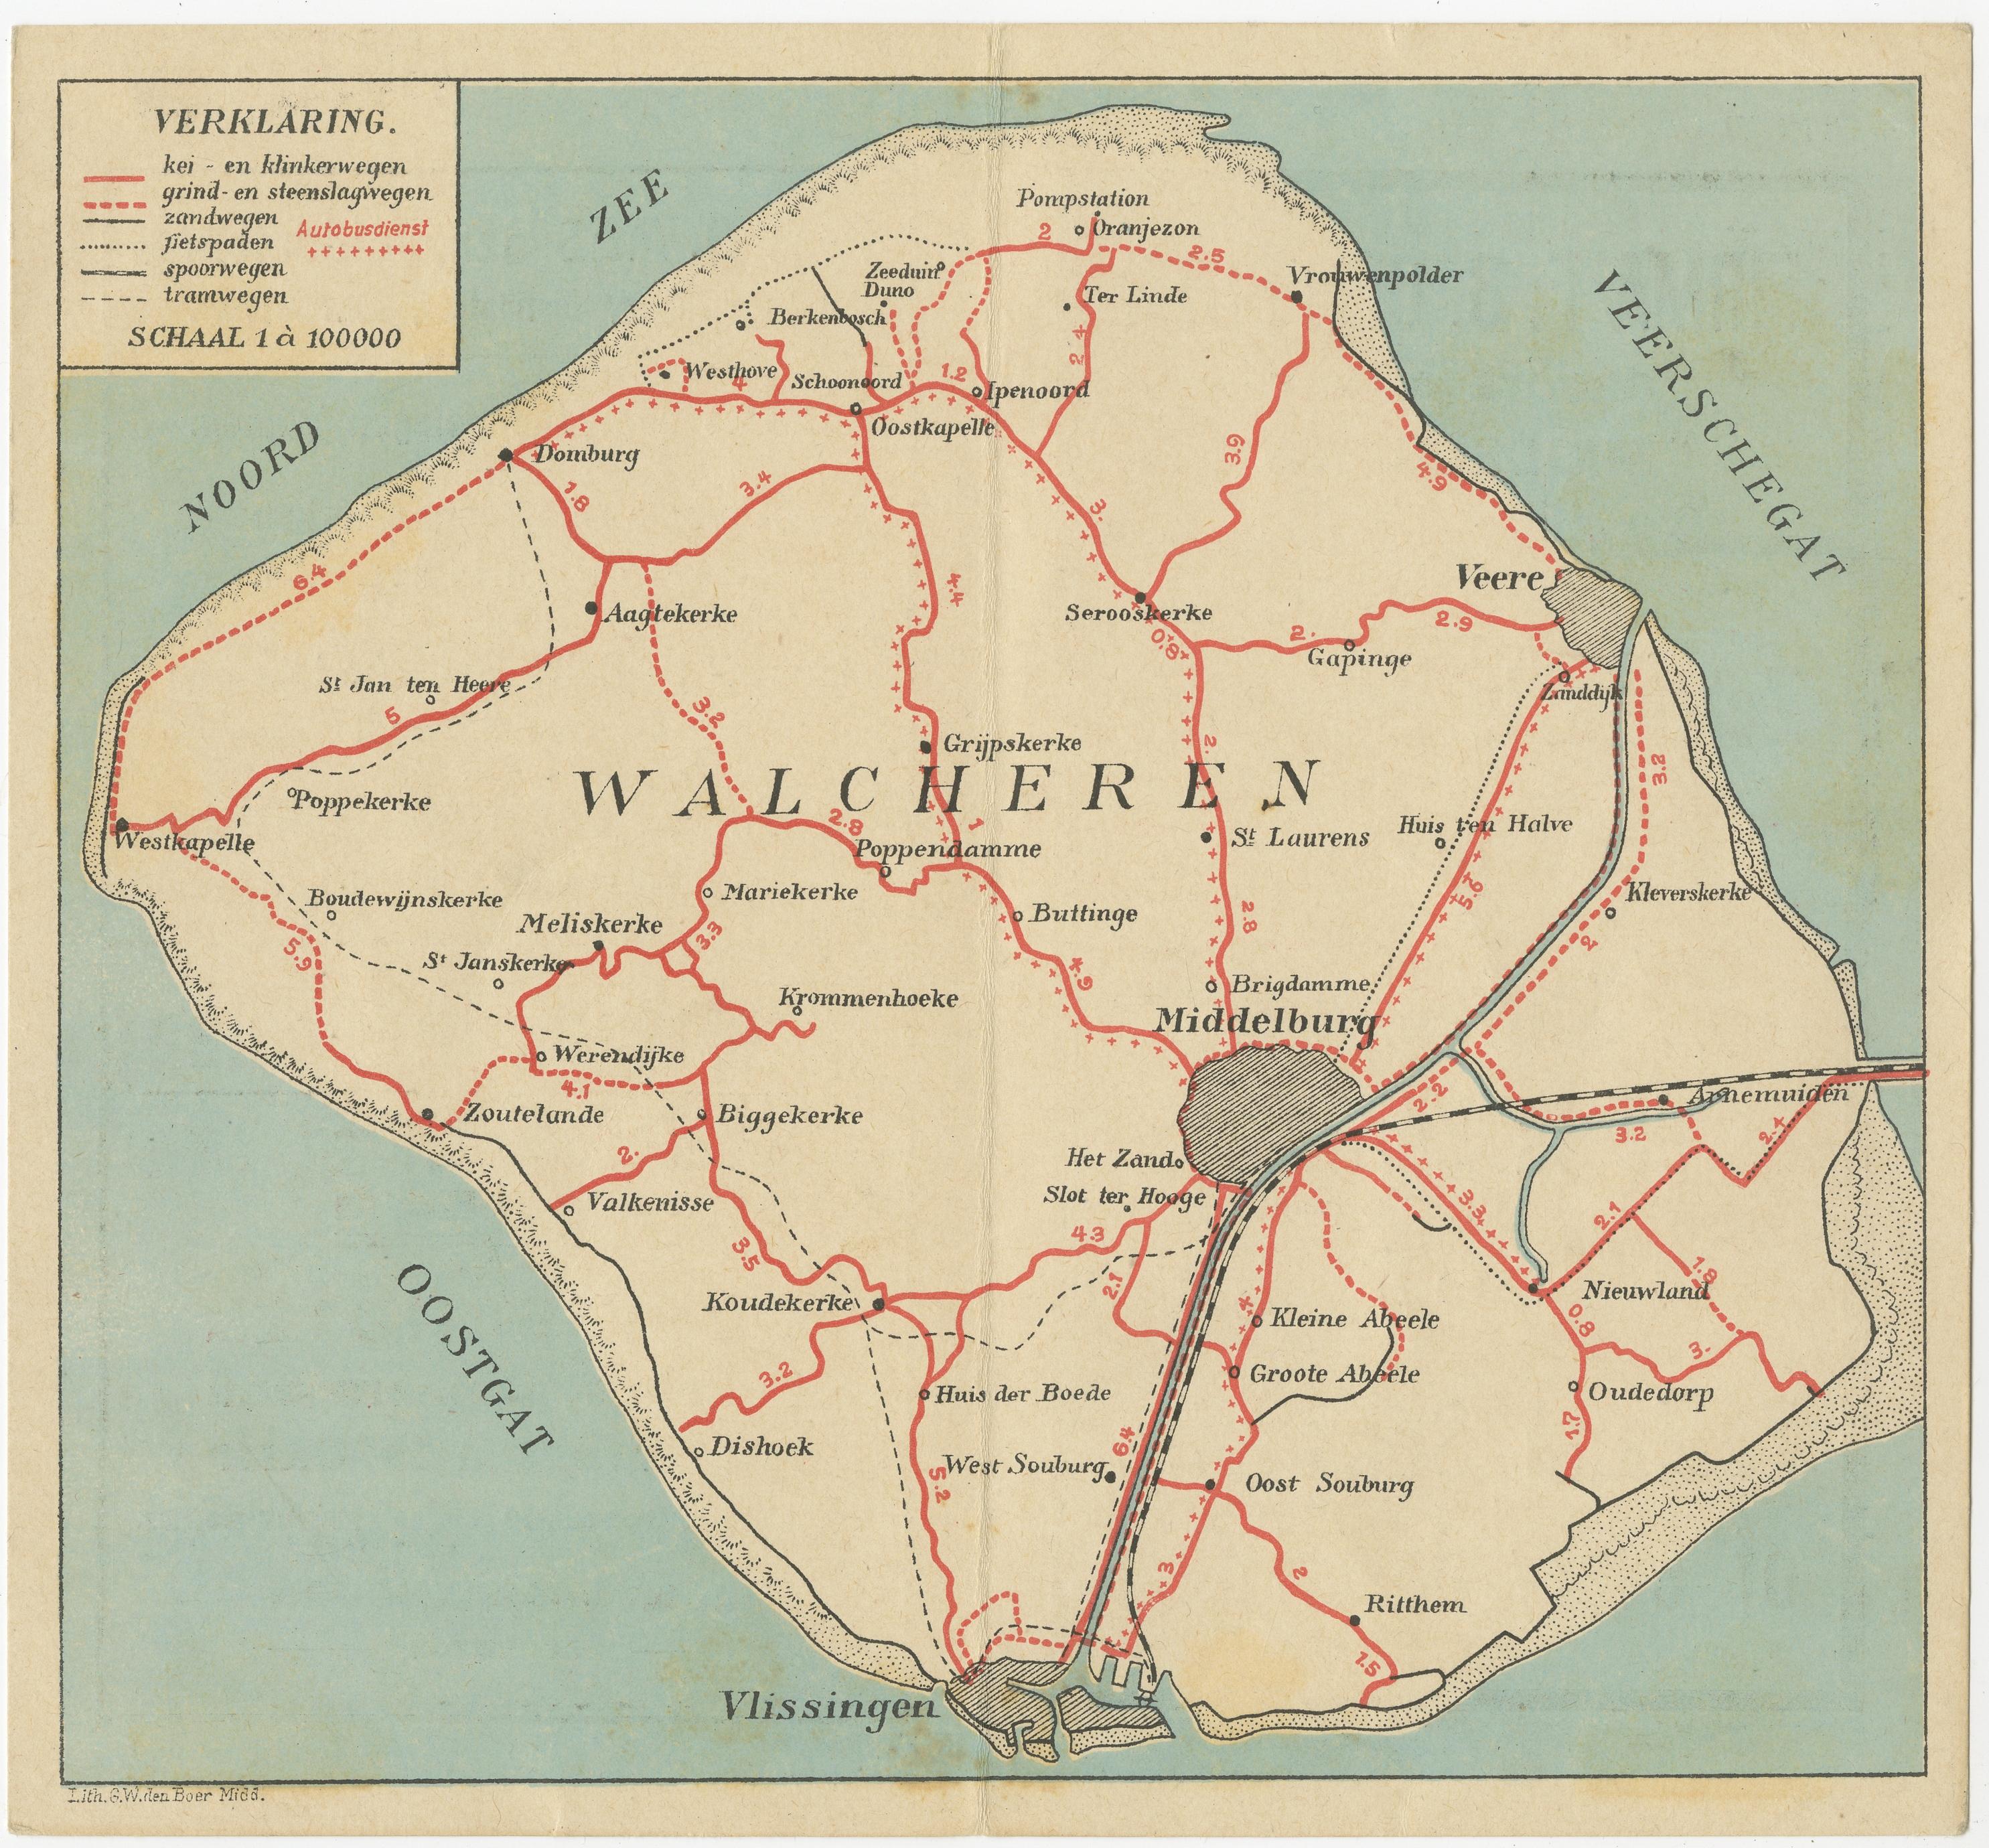 Antique map of Walcheren, part of the province of Zeeland, the Netherlands. 

Shows the cities of Veere, Middelburg, Vlissingen and others. Source unknown, to be determined. Published c.1910. 

Walcheren is a region and former island in the